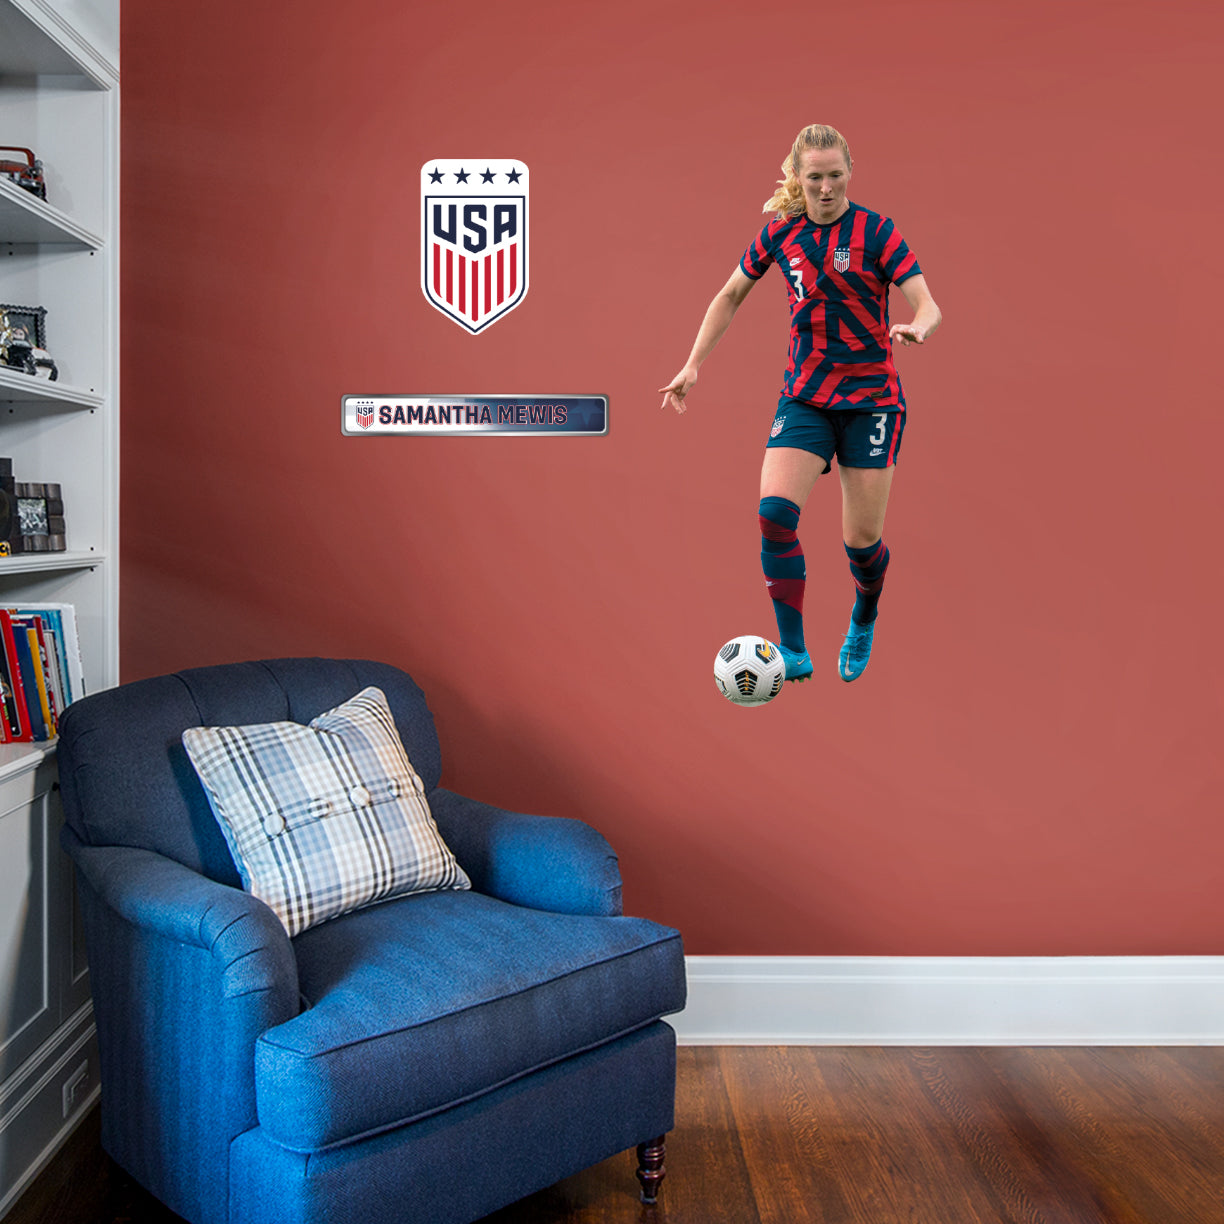 Samantha Mewis  RealBig- Officially Licensed US Soccer Removable     Adhesive Decal